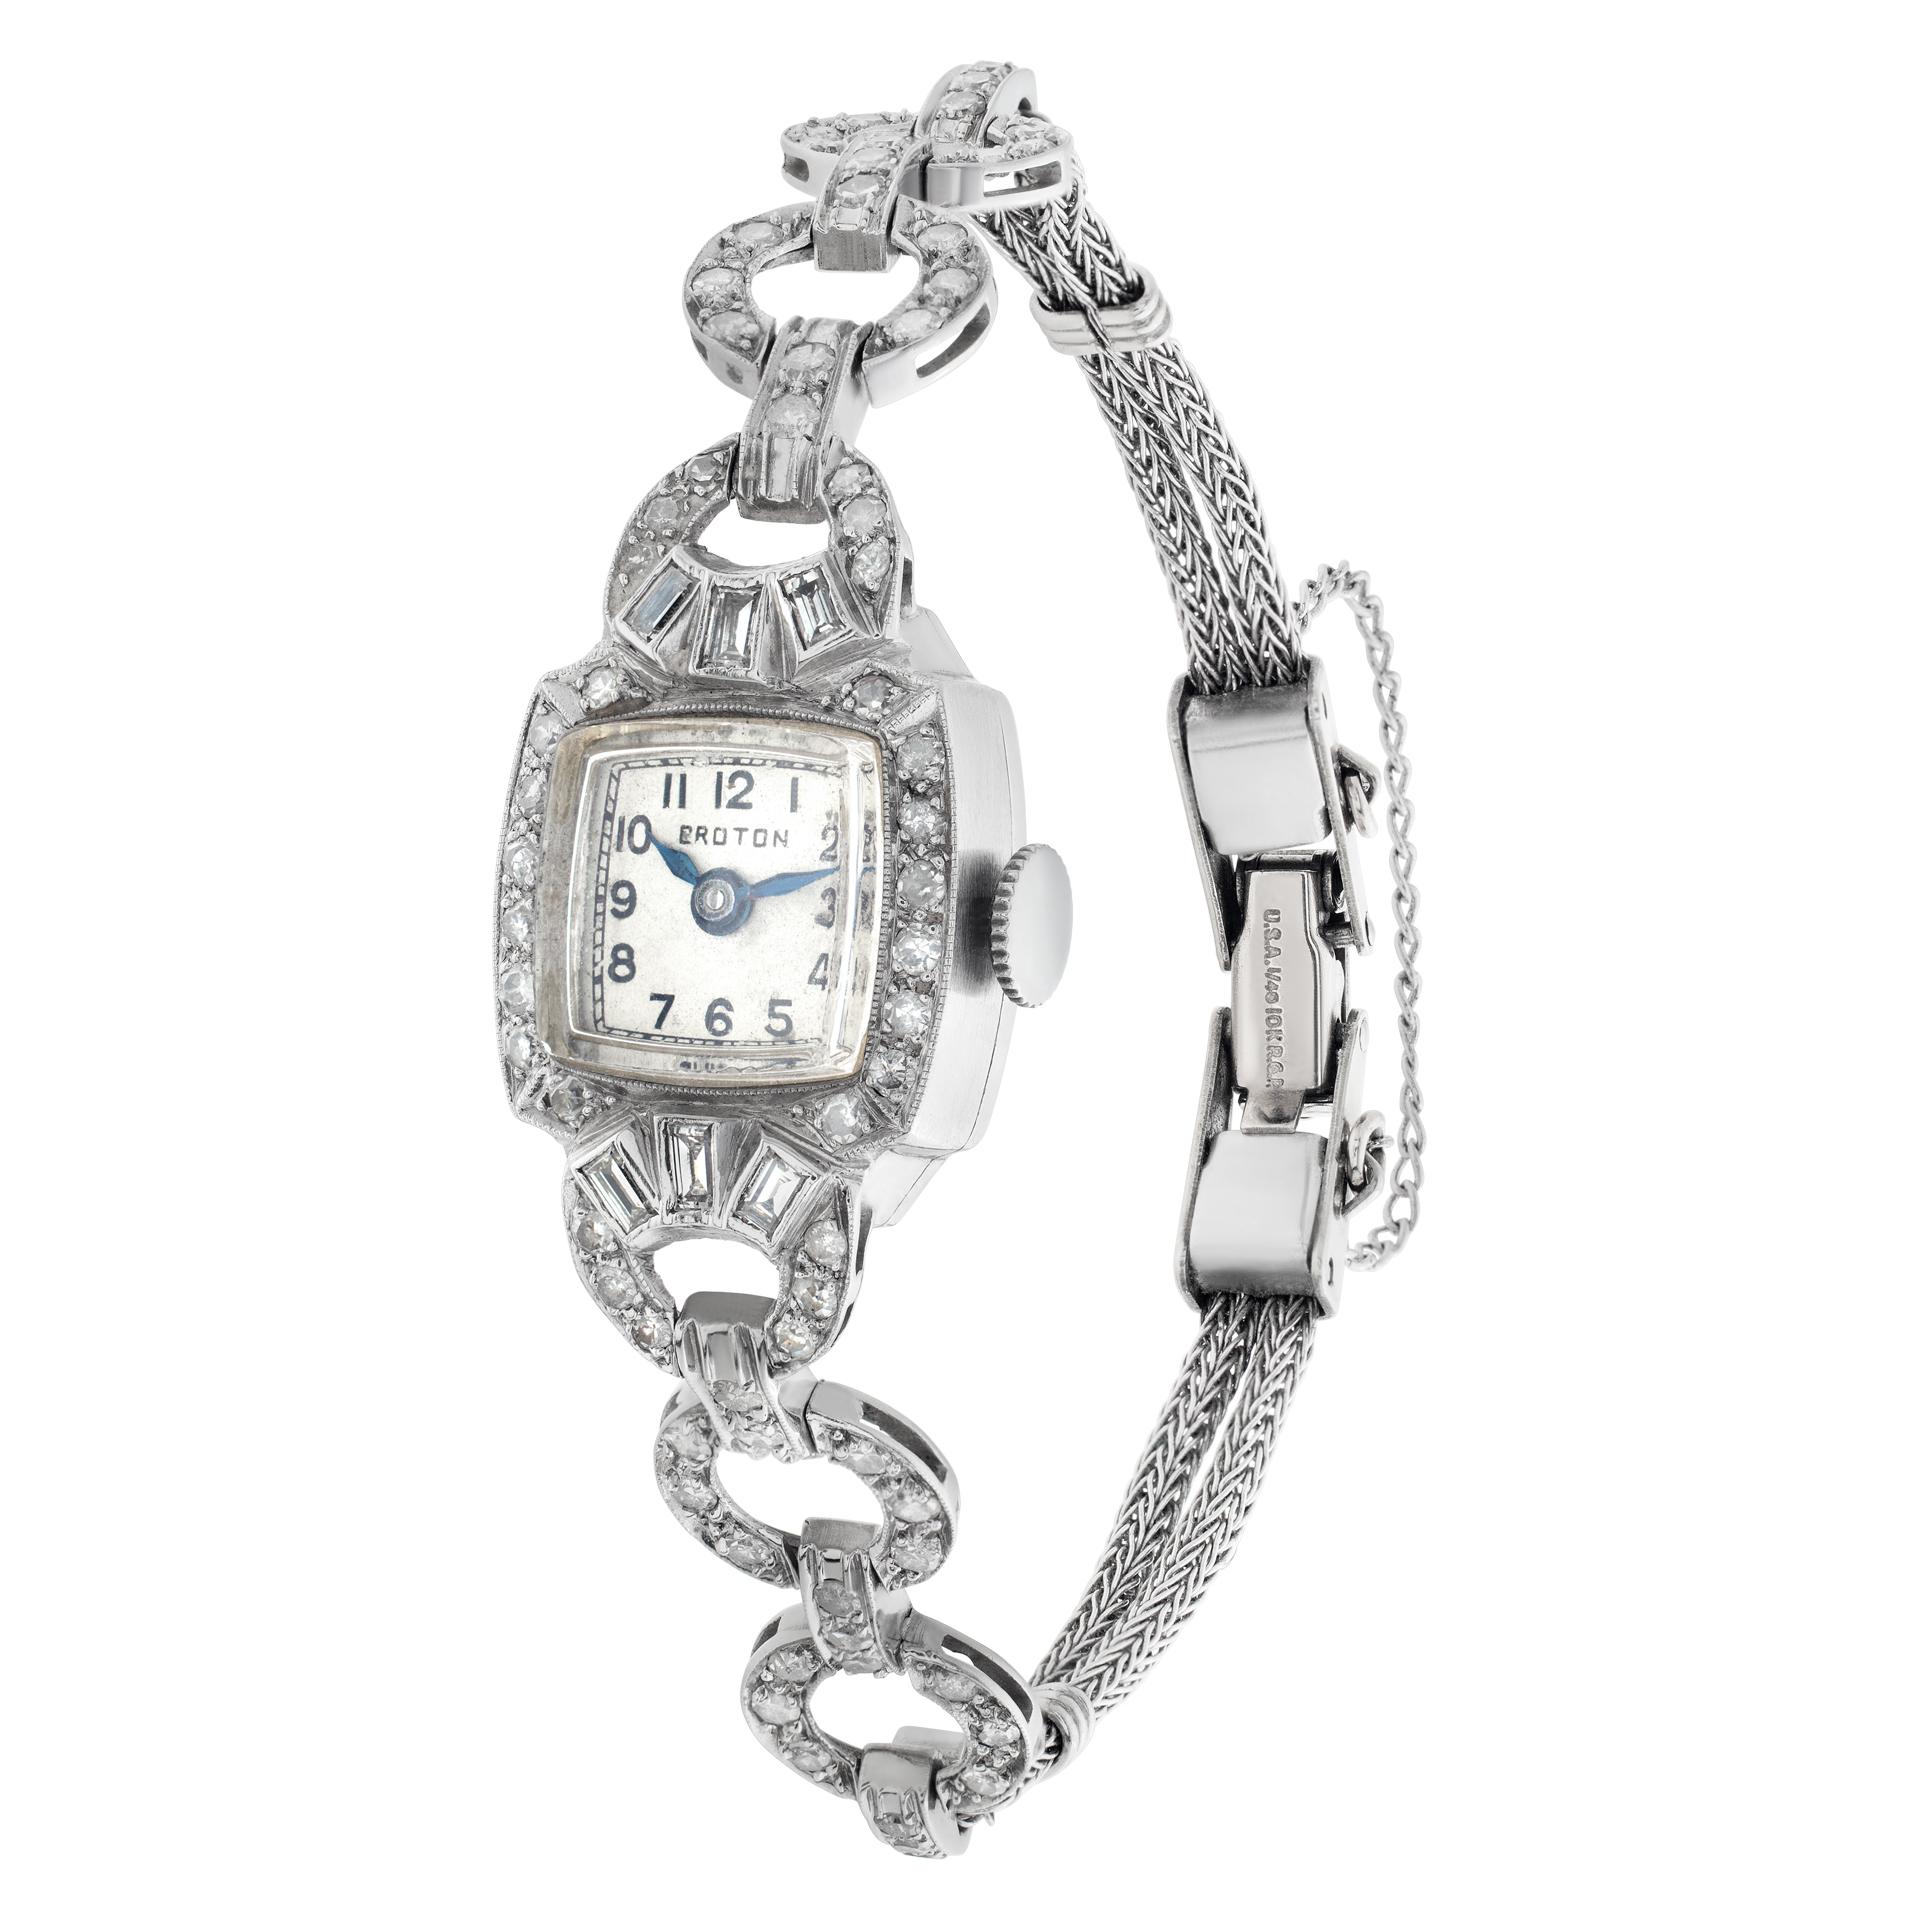 Croton Cocktail watch in platinum & diamond bracelet extensions and then white gold filled bracelet. Approximately 1 carat in G-H color, VS-SI clarity diamonds. Manual. 14.5 mm case size. Circa 1950s. Fine Pre-owned Croton Watch. Certified preowned